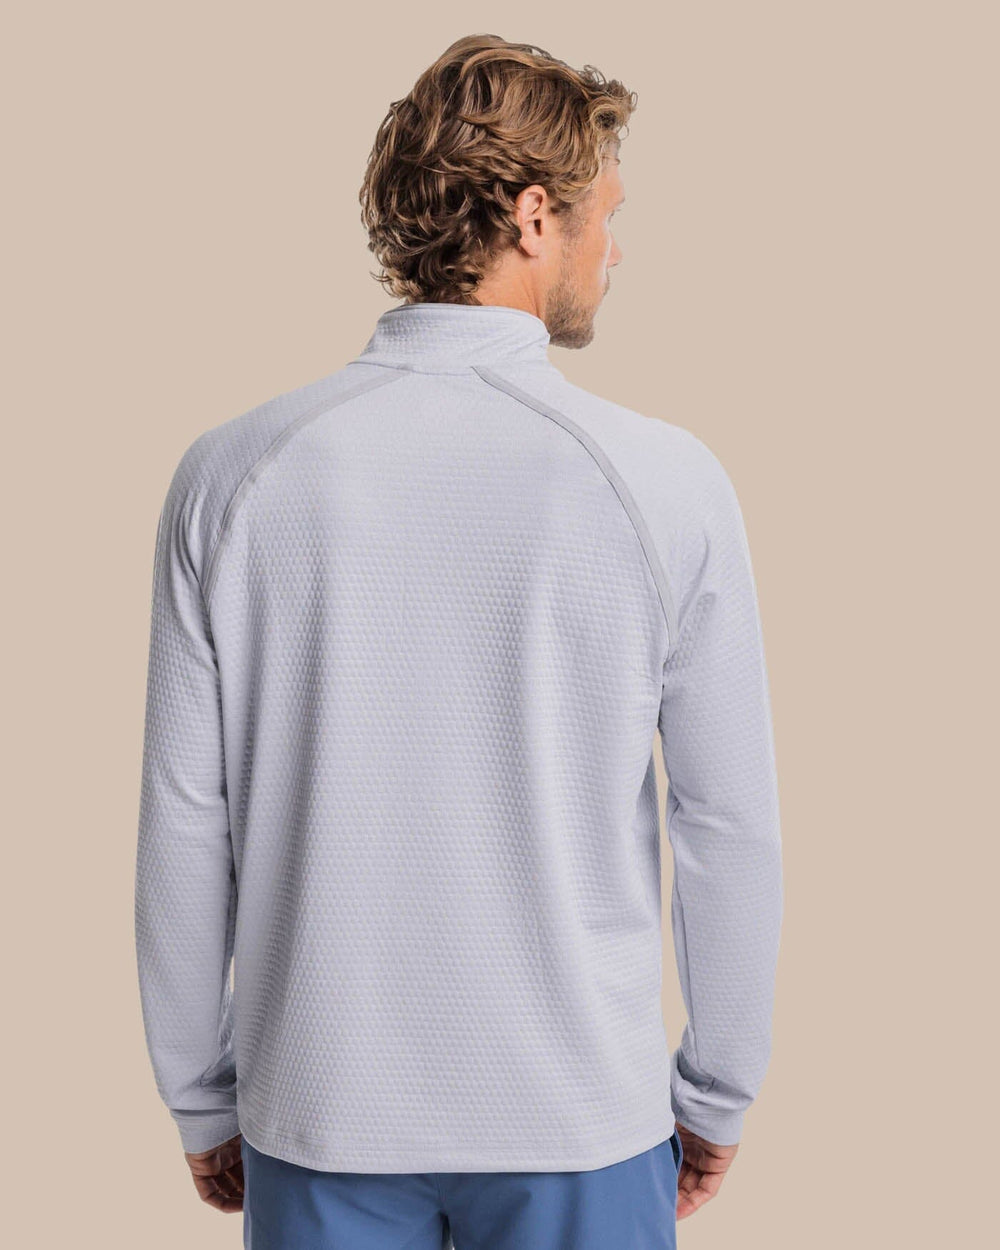 The back view of the Southern Tide Scuttle Heather Quarter Zip Pullover by Southern Tide - Heather Slate Grey